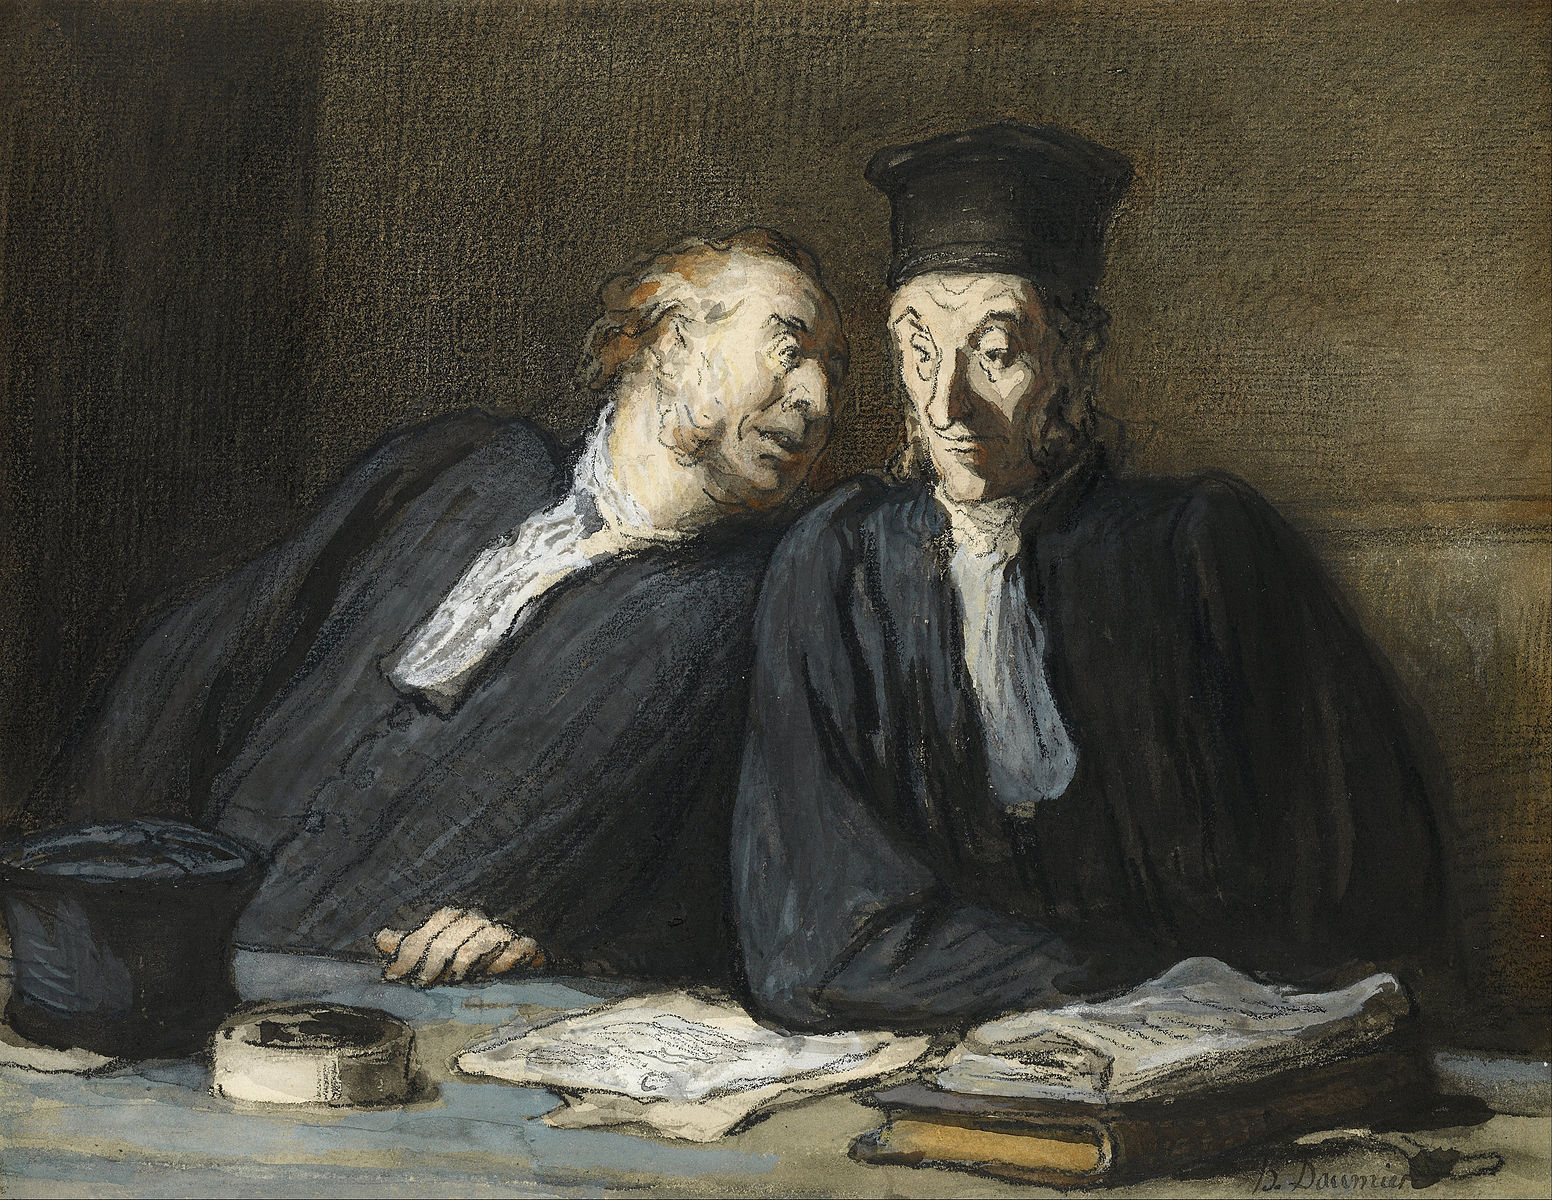 Daumier. Two lawyers conversing